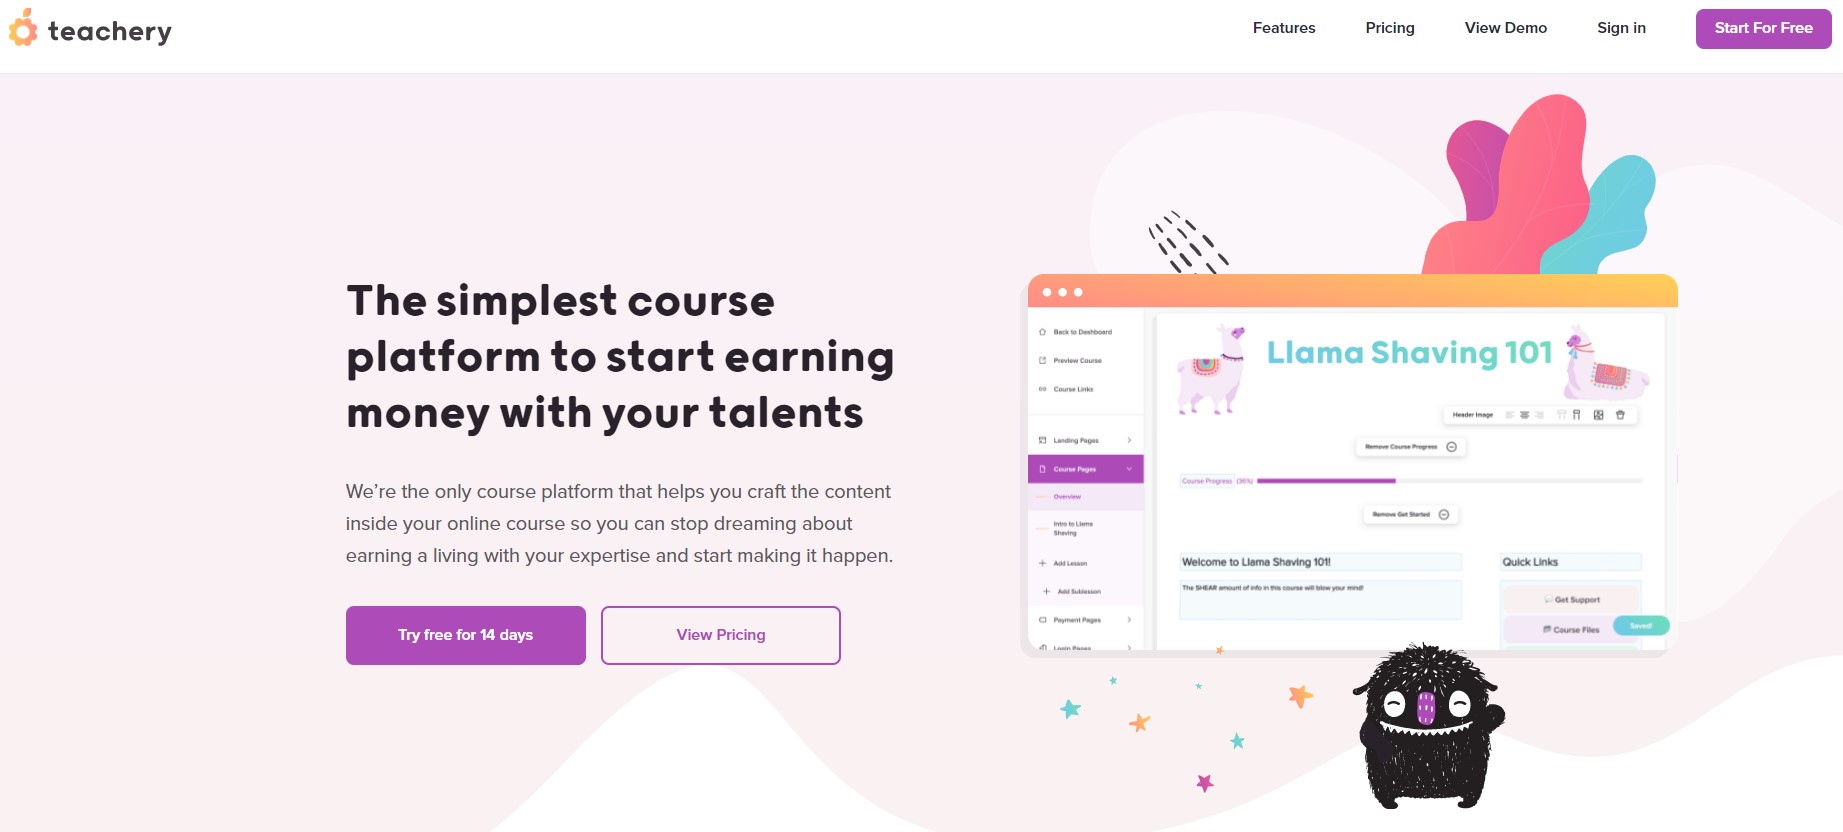 Teachery is one of the best online learning platforms where you can create online courses from your expertise and monetize them. 